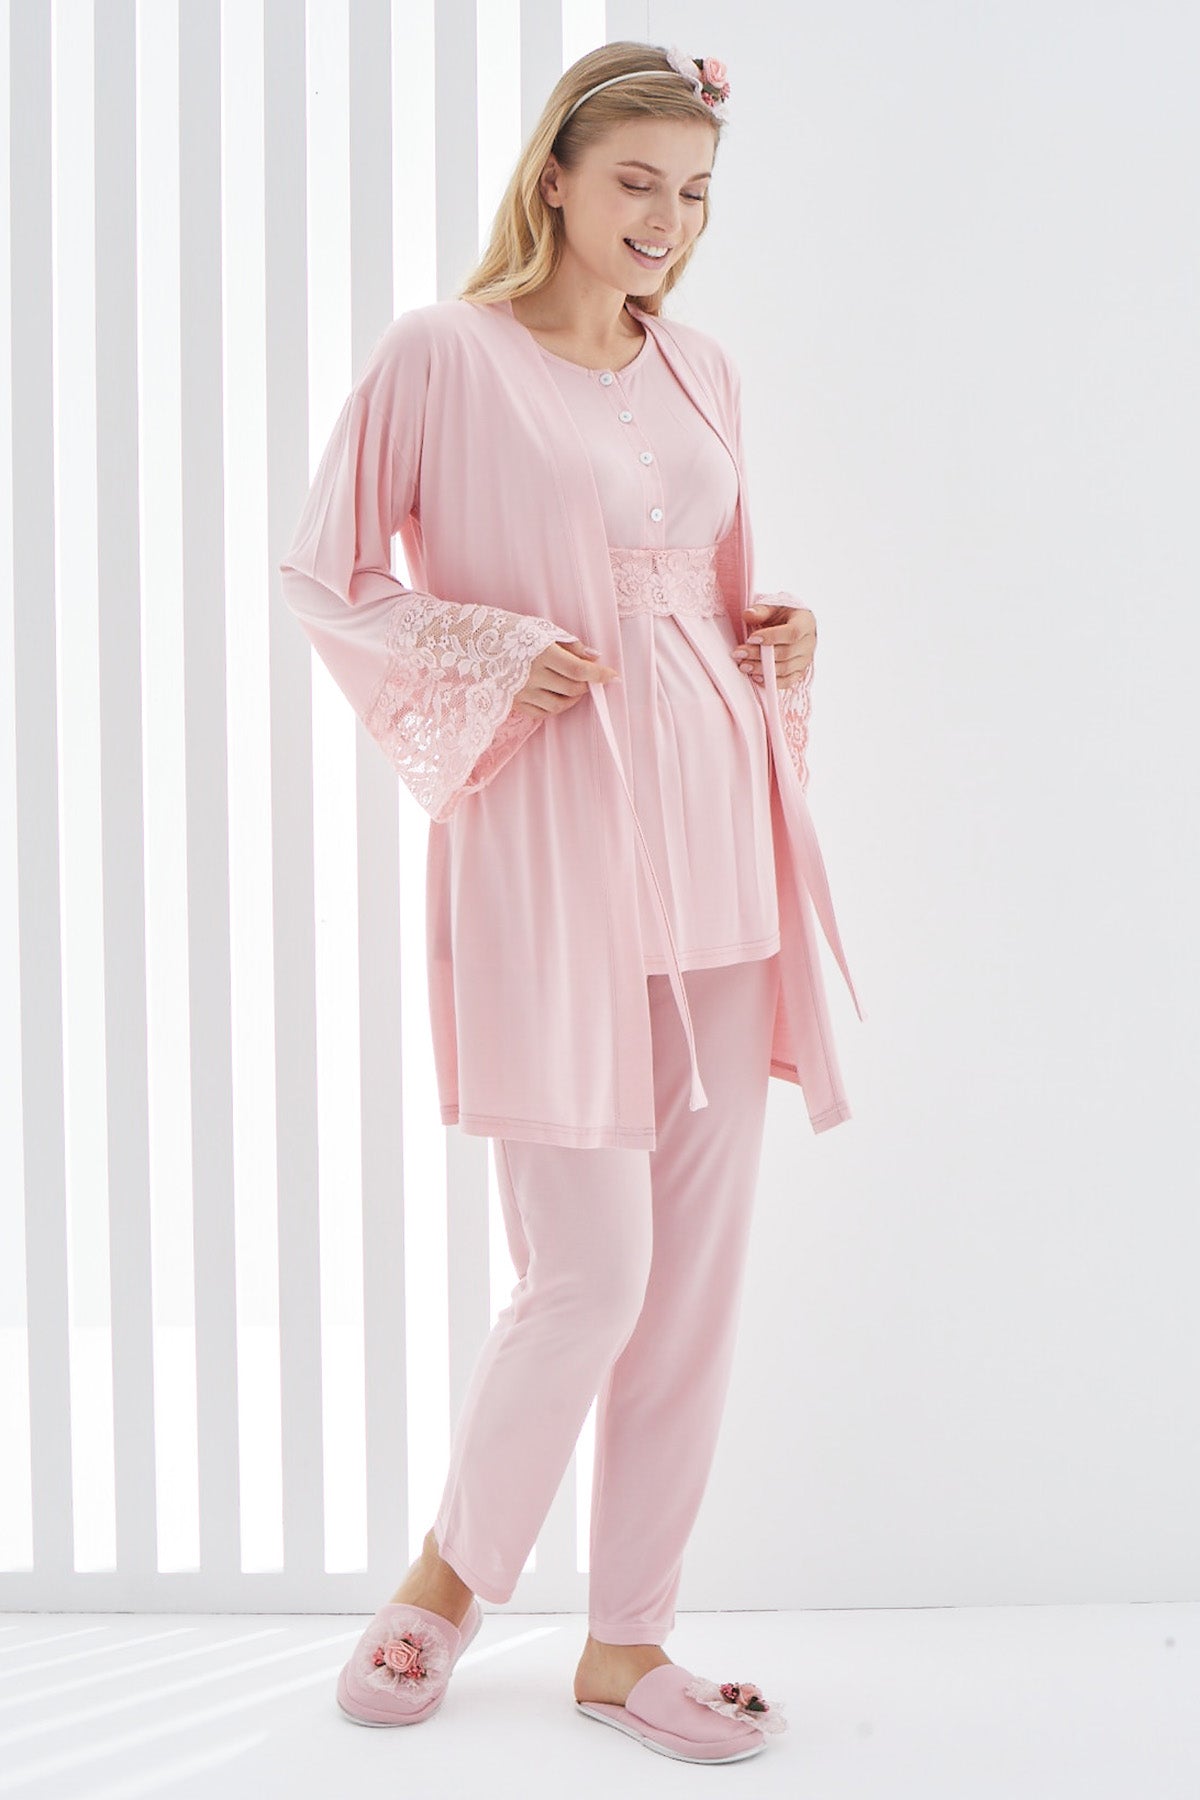 Shopymommy 3412 Lace 3-Pieces Maternity & Nursing Pajamas With Lace Flywheel Arm Robe Powder